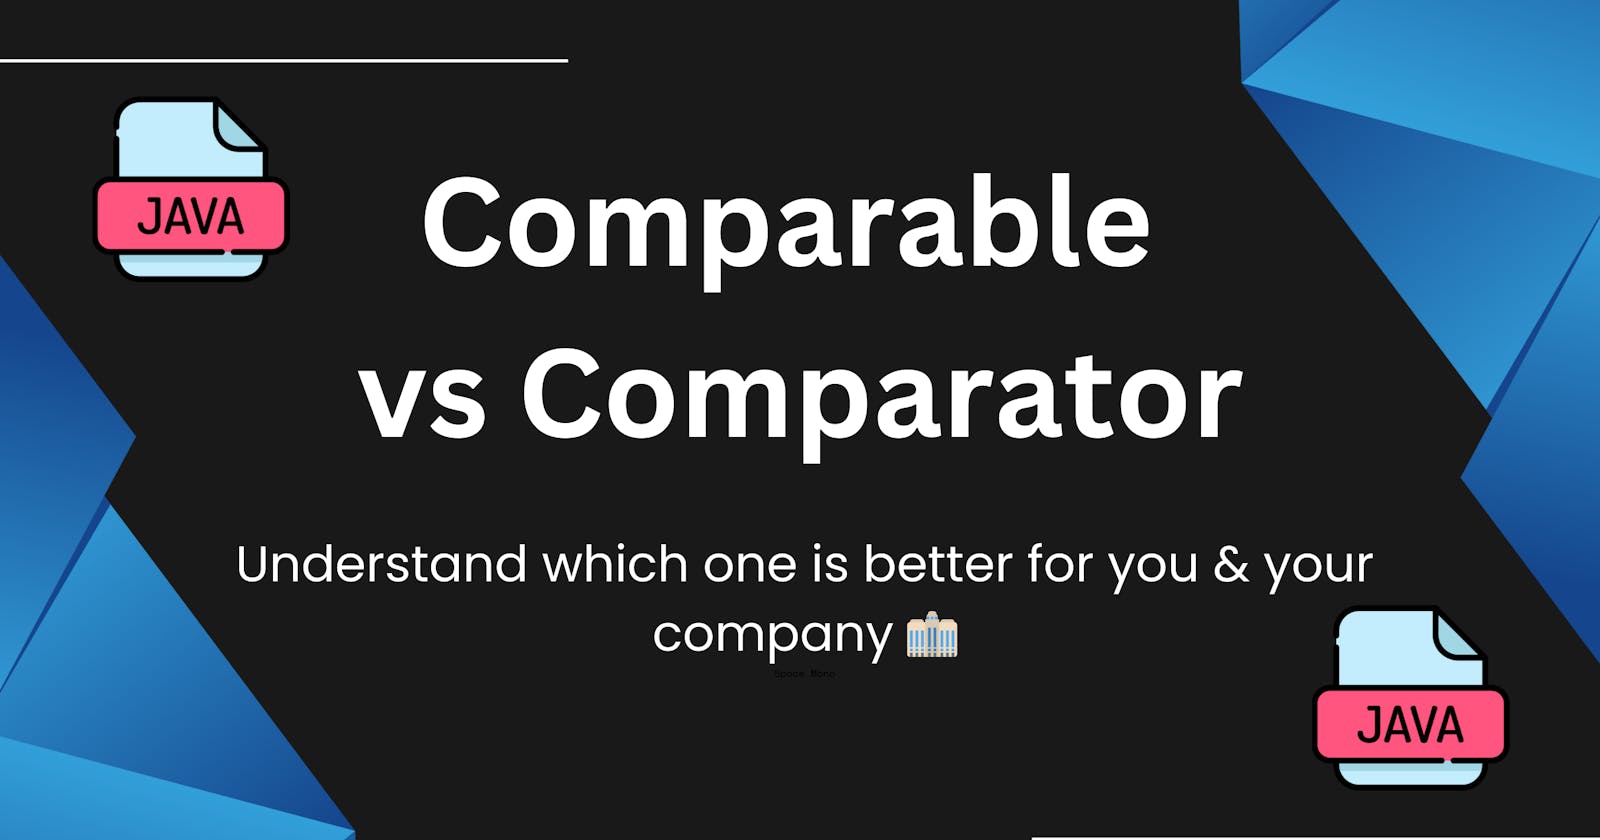 Comparable vs Comparator in easy way 🤓